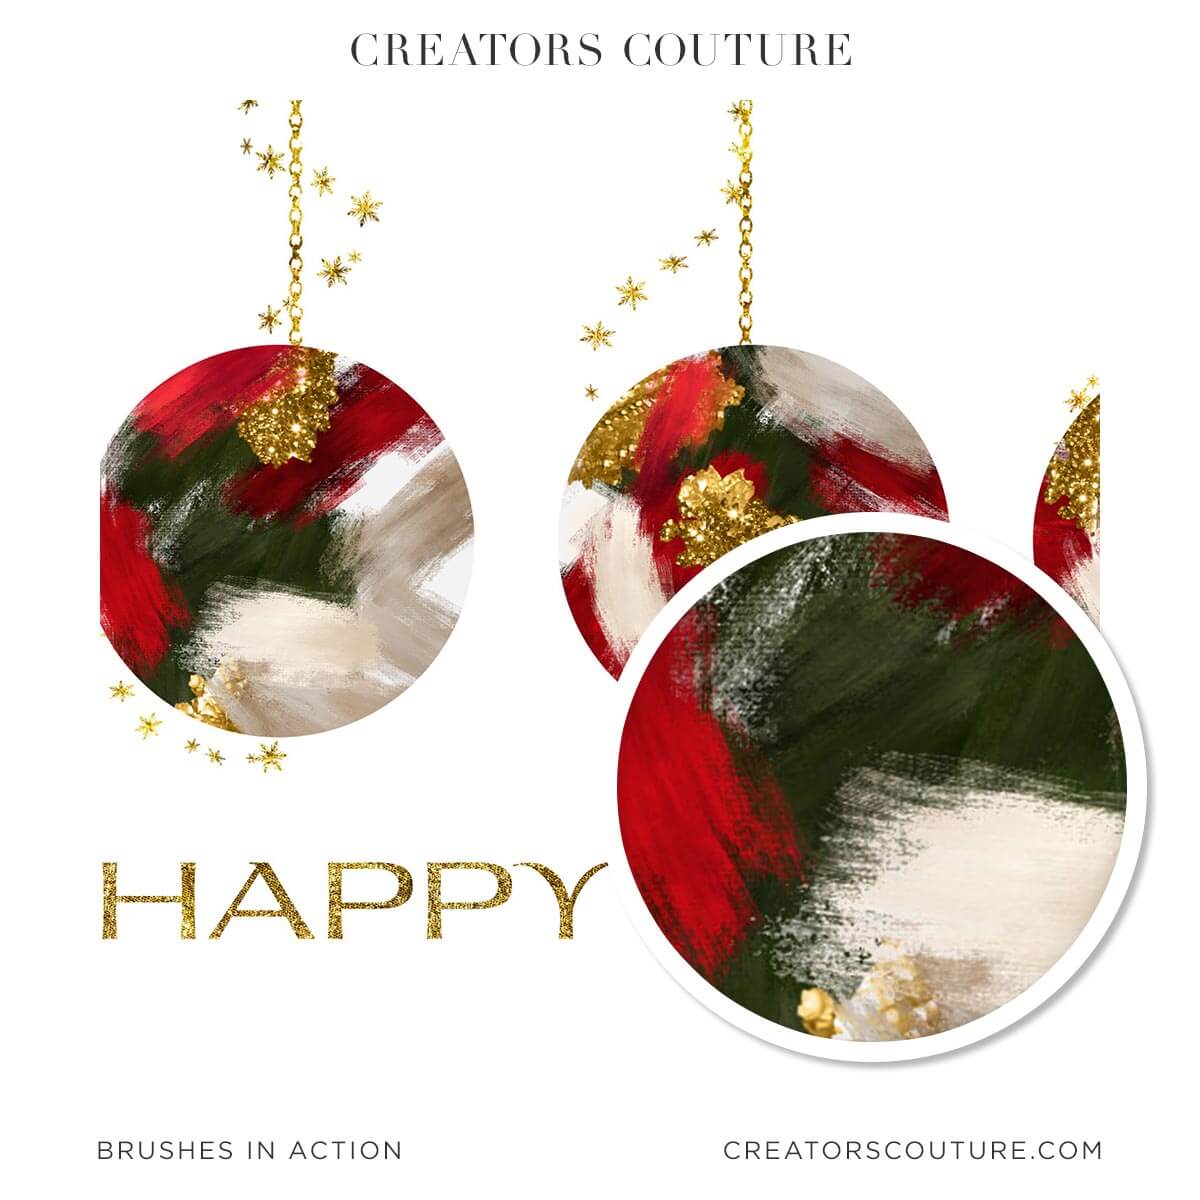 Abstract illustration of Christmas ornaments created with impressionist brushes and accents of metallic gold, colors in red green and cream